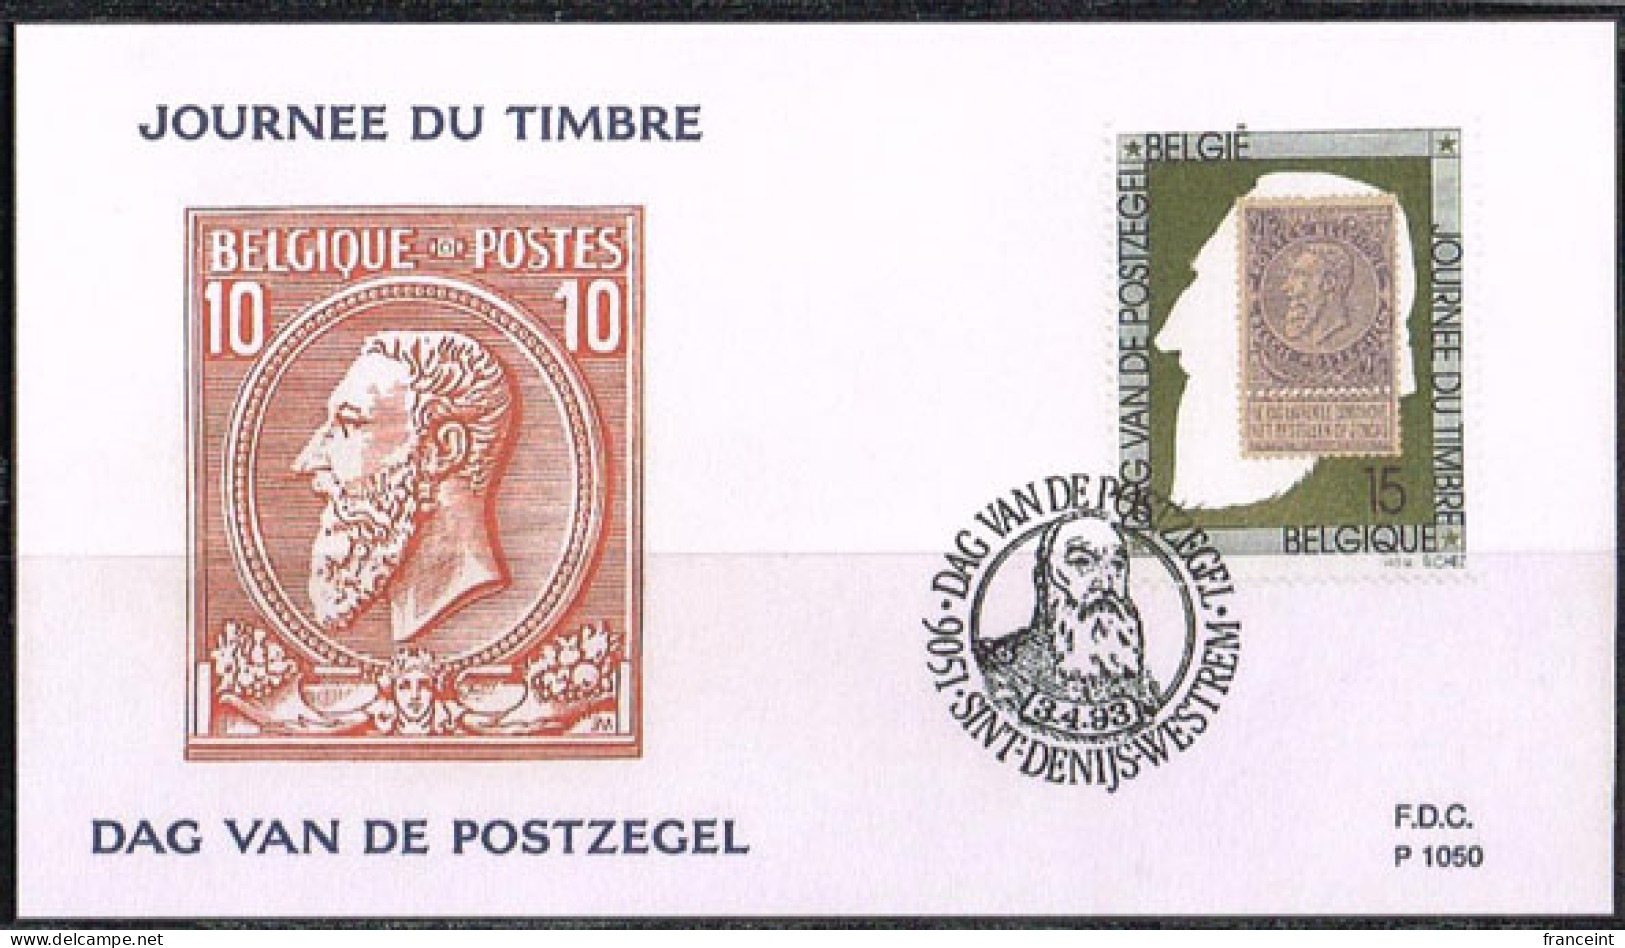 BELGIUM(1993) Old Leopold Stamp. Die Proof In Black Signed By The Engraver, Representing The FDC Cachet. Scott 1582 - Ensayos & Reimpresiones